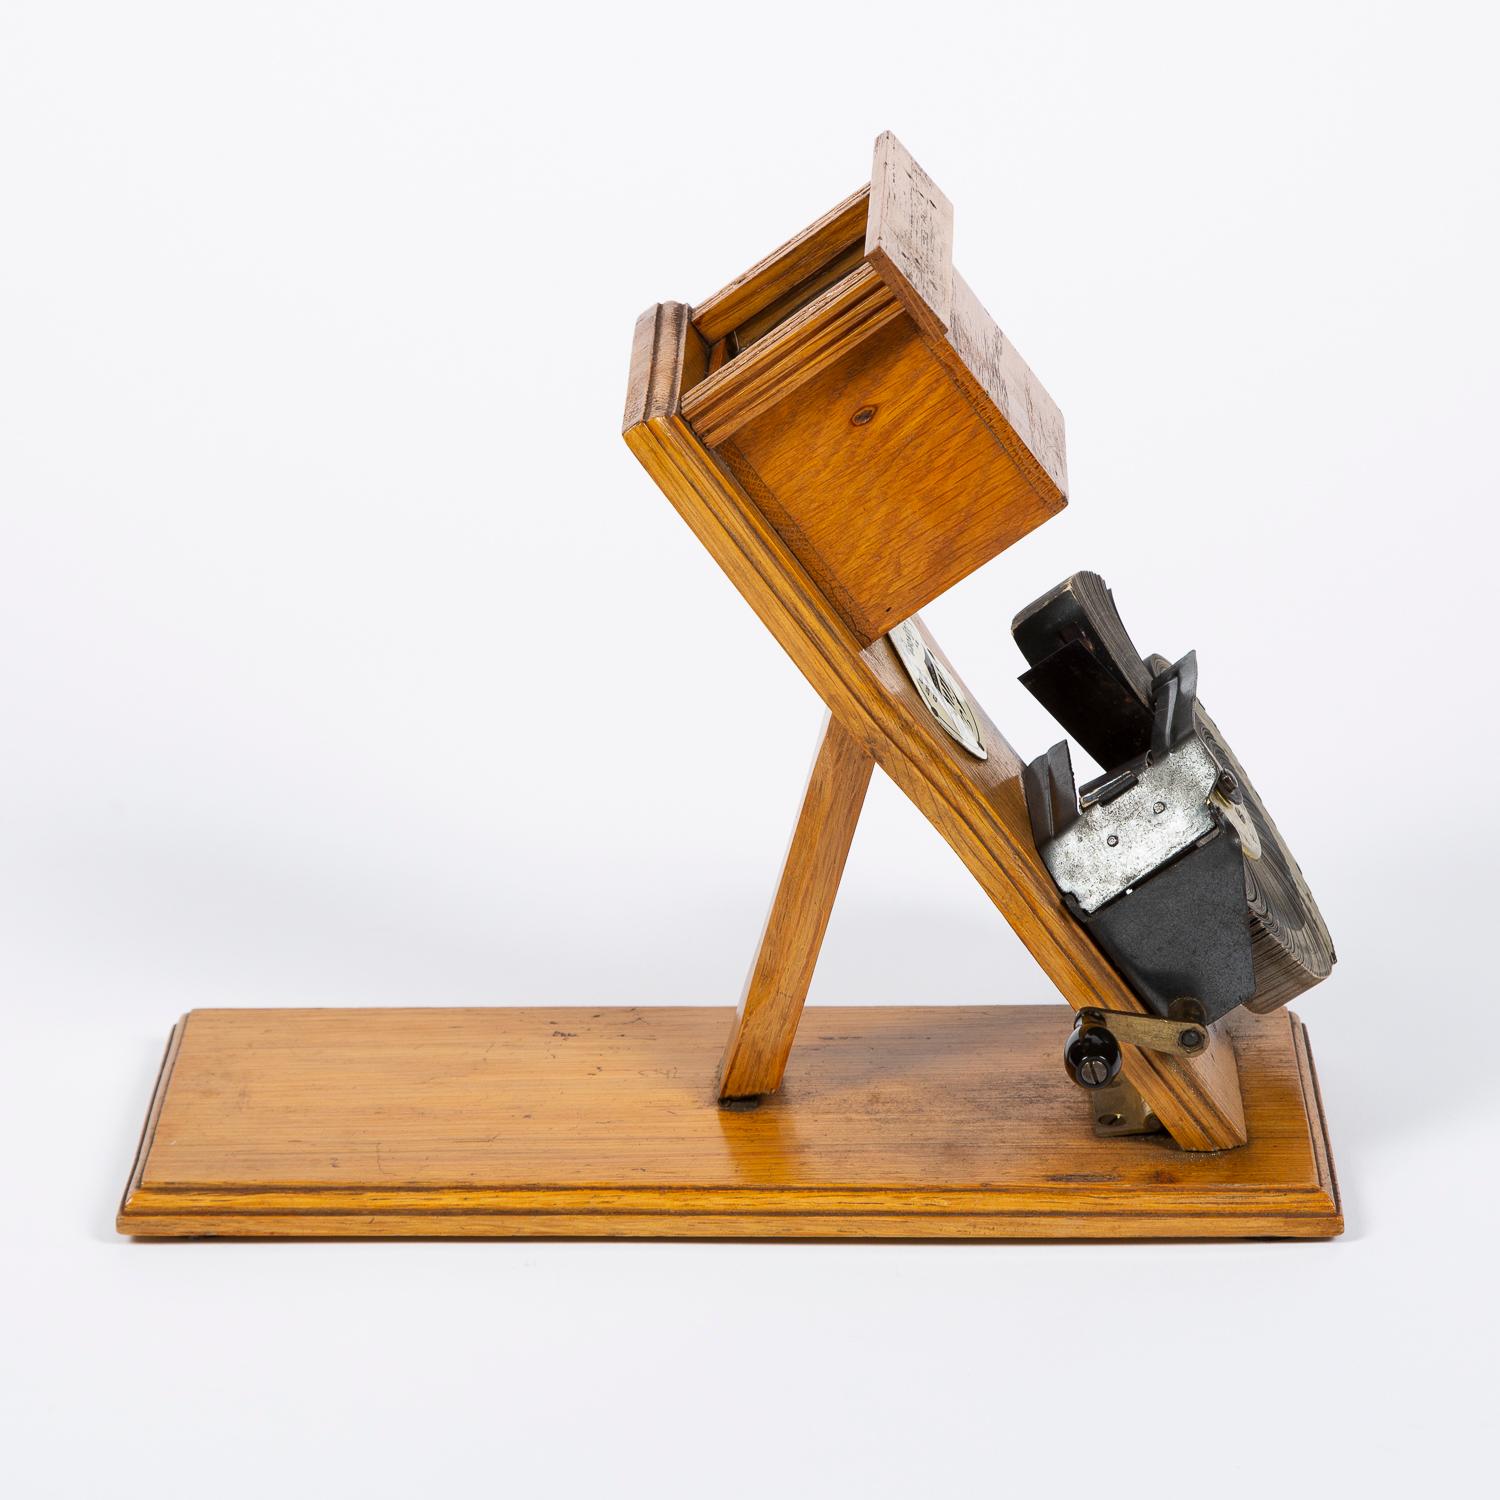 A rare model of a Kinora monochrome motion picture viewer on folding base. Light oak lens holder and base, with the circular Kinora badge, circa 1905.

The Kinora was an early motion picture device, developed by the French inventors Auguste and